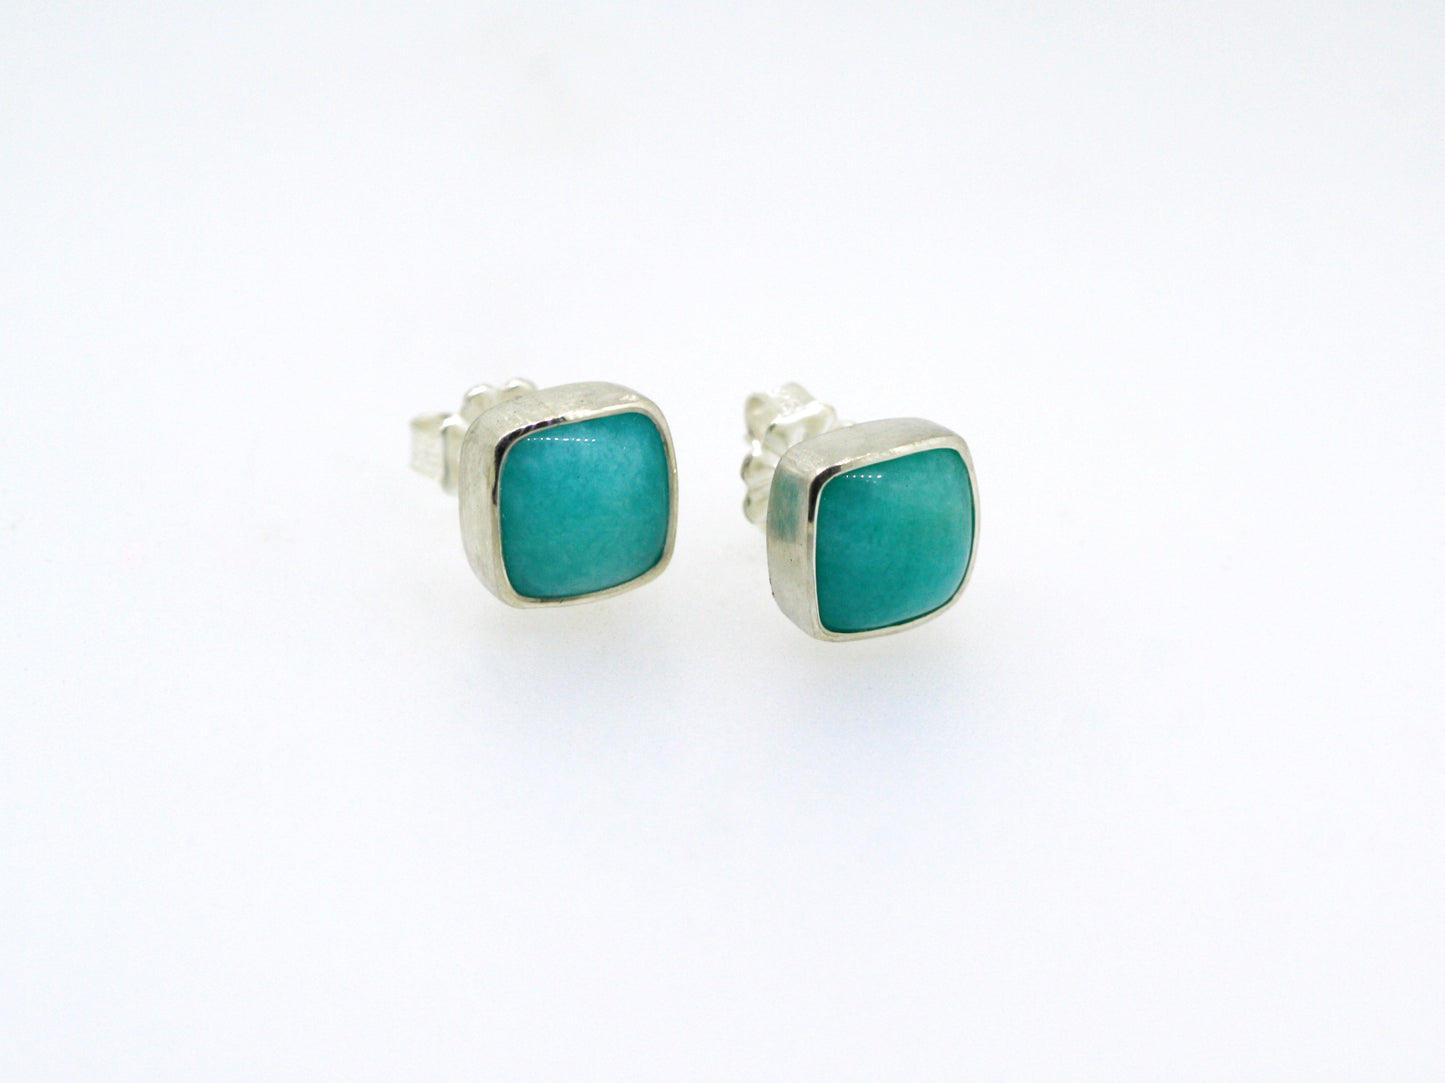 UPDATE: Amazonite and Silver Earrings